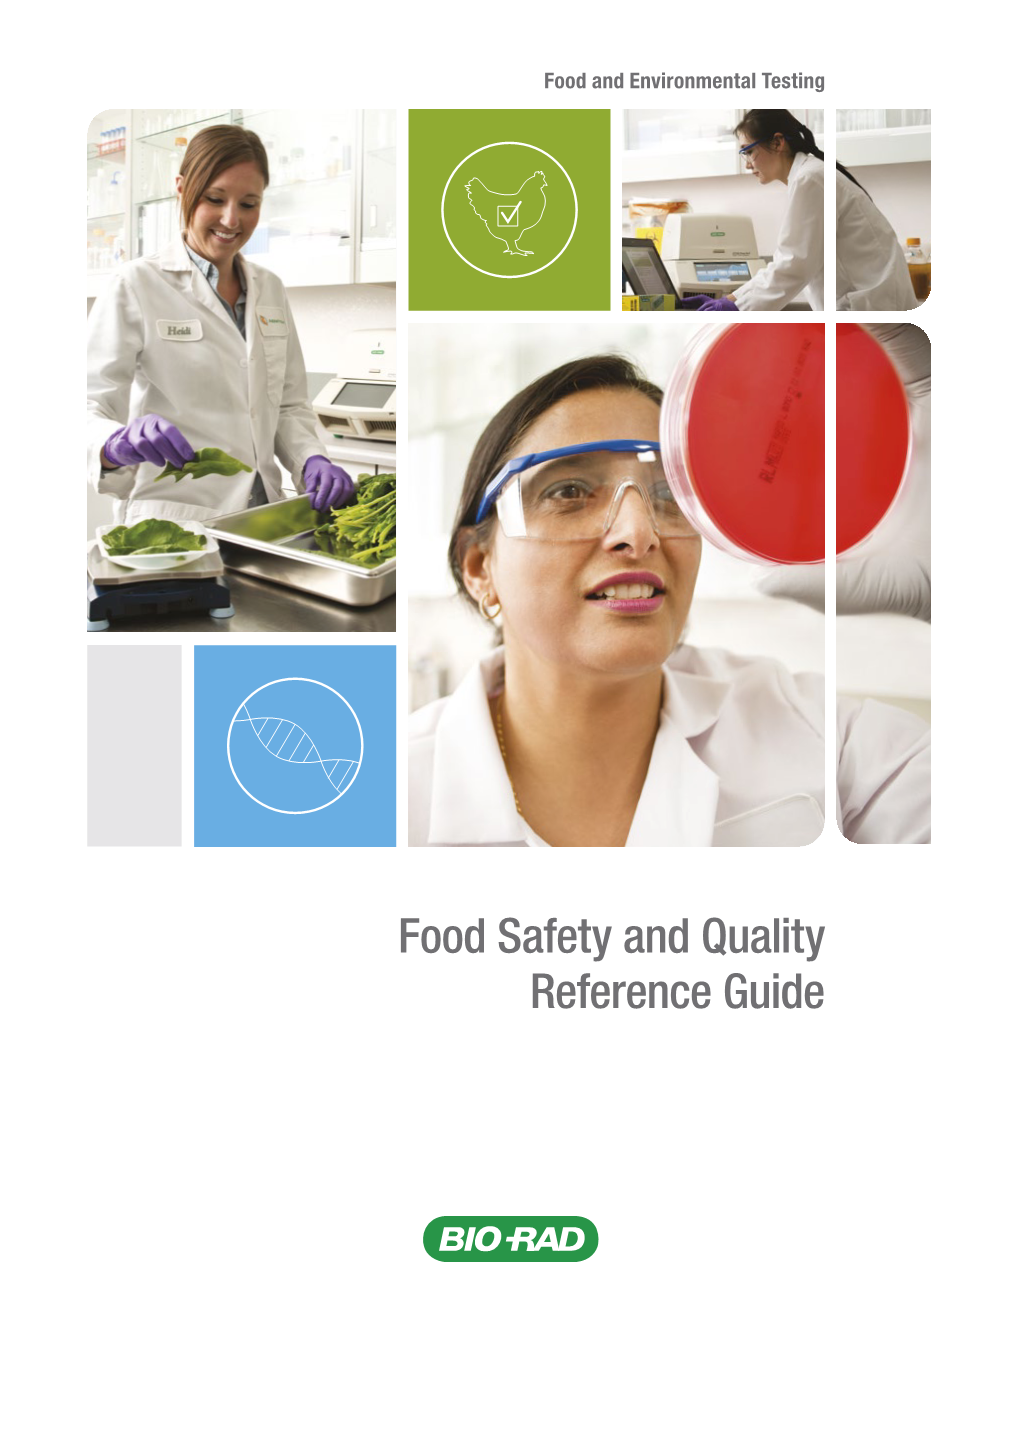 Food Safety and Quality Reference Guide Contents